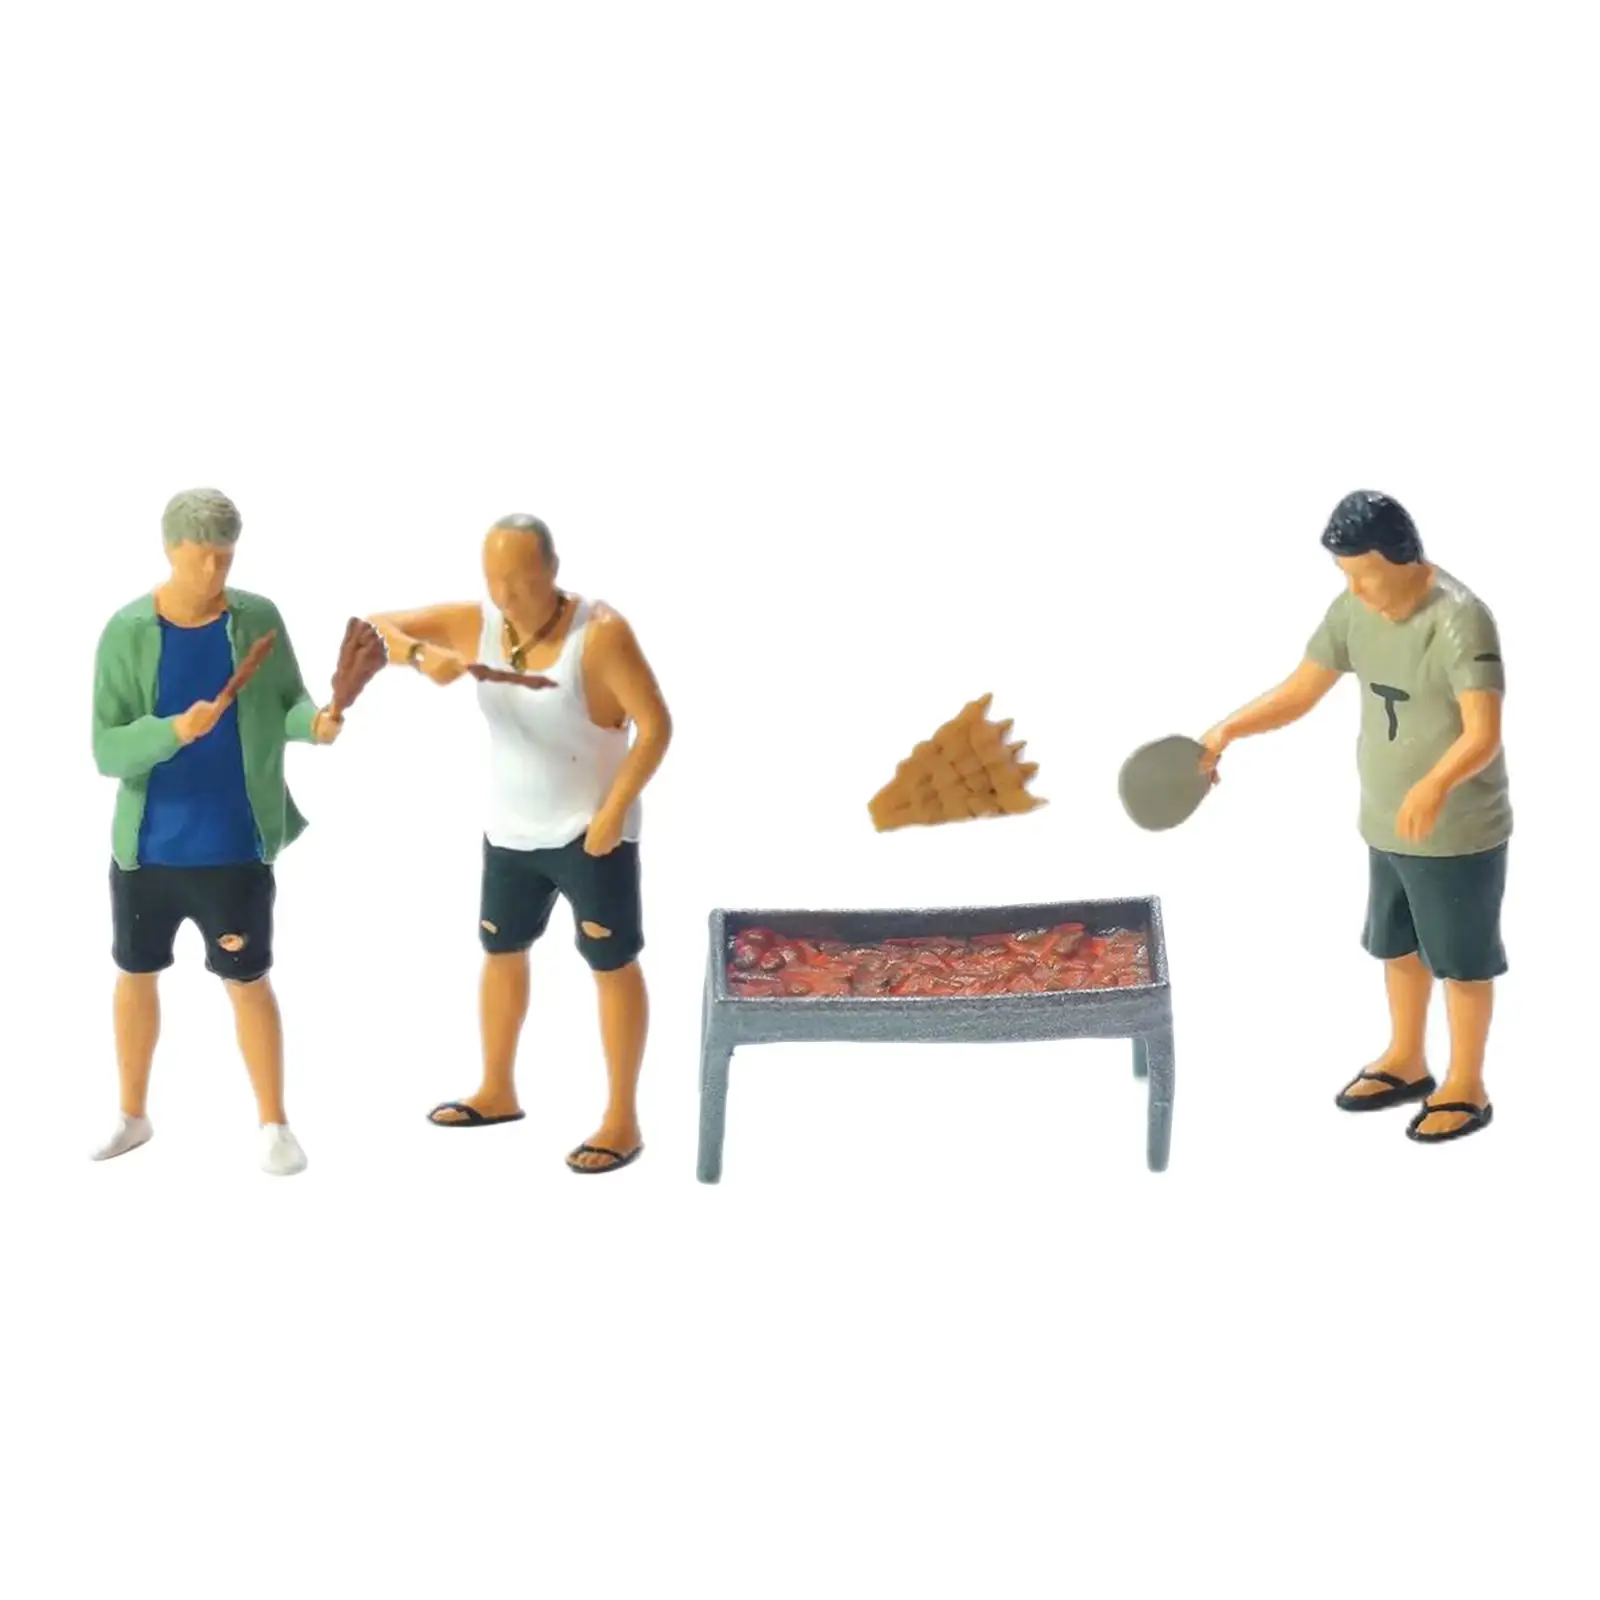 5 Pieces 1:64 Scale Tiny BBQ People Set Train Railway S Scale Sand Table Layout Decoration Diorama Scenery Miniature Decor